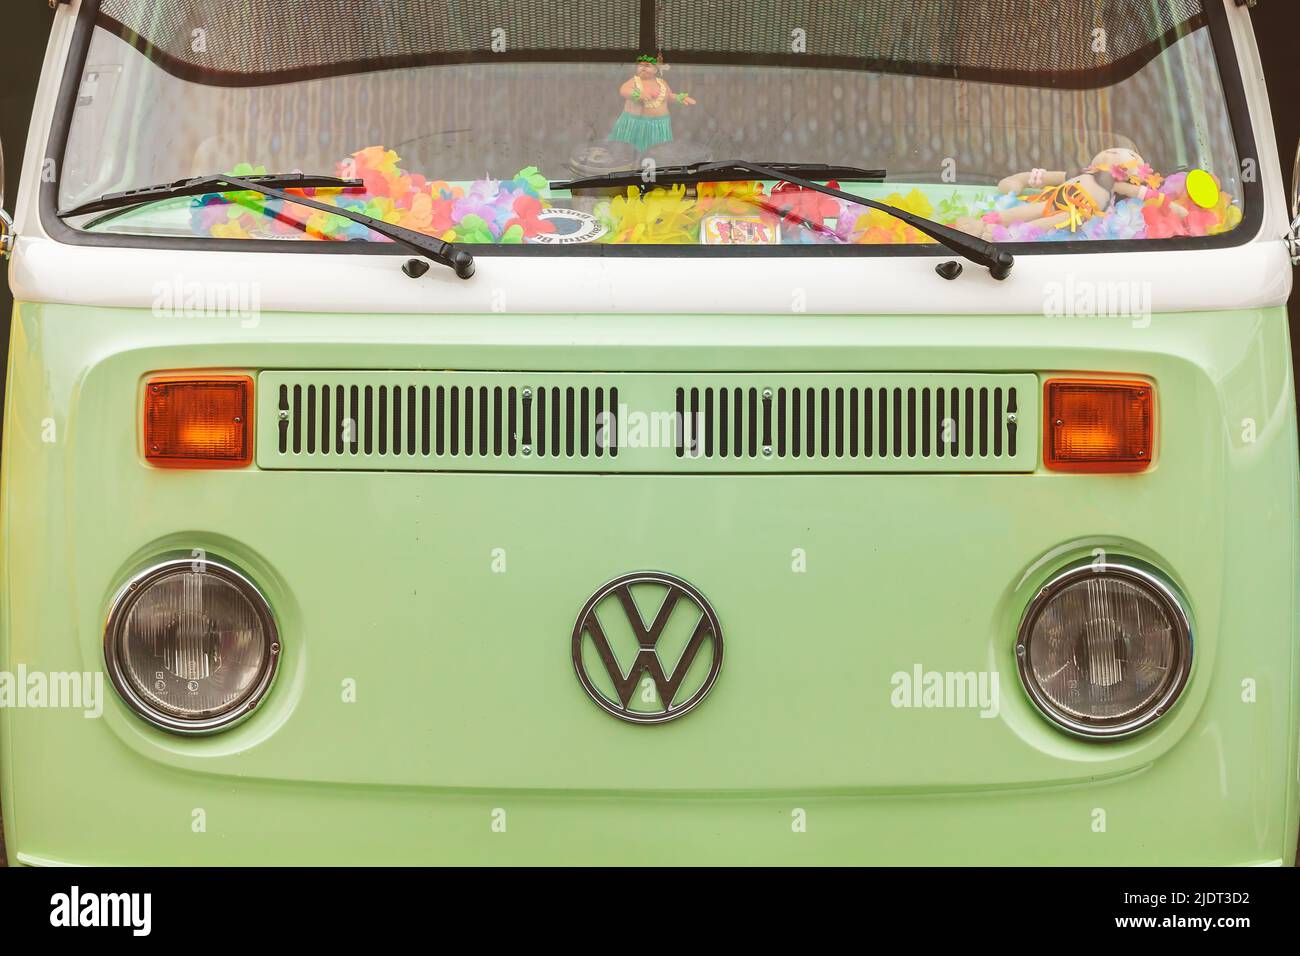 ROSMALEN, THE NETHERLANDS - JANUARY 8, 2017: Close up of the front of a vintage Volkswagen Transporter Bus in Rosmalen, The Netherlands Stock Photo